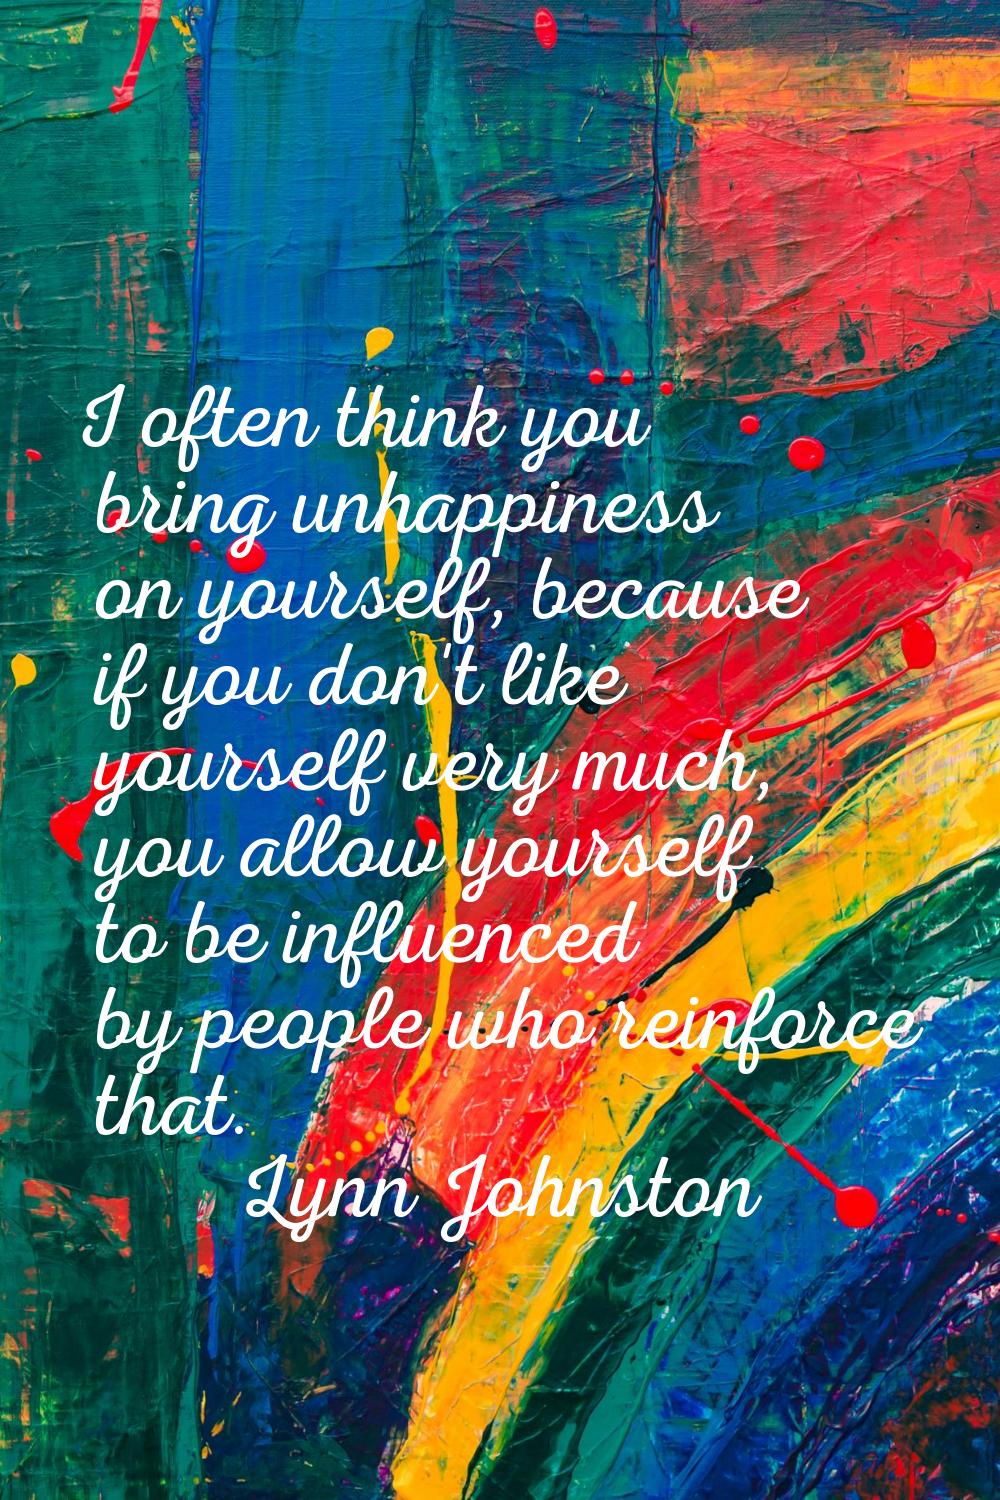 I often think you bring unhappiness on yourself, because if you don't like yourself very much, you 